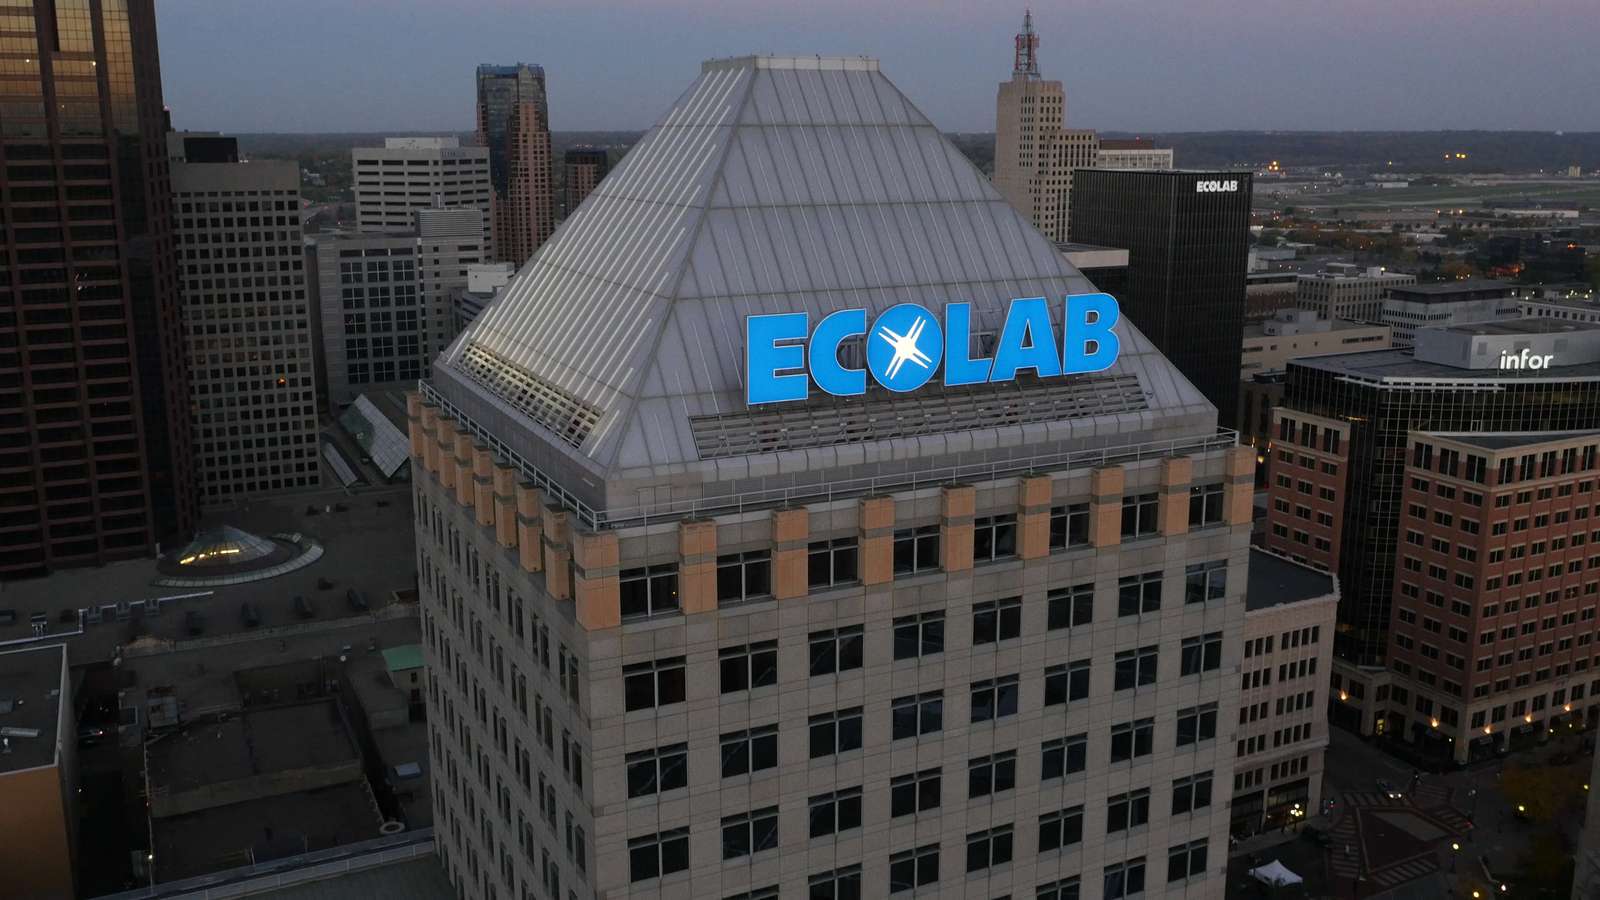 Ecolab Puzzle puzzle online from photo